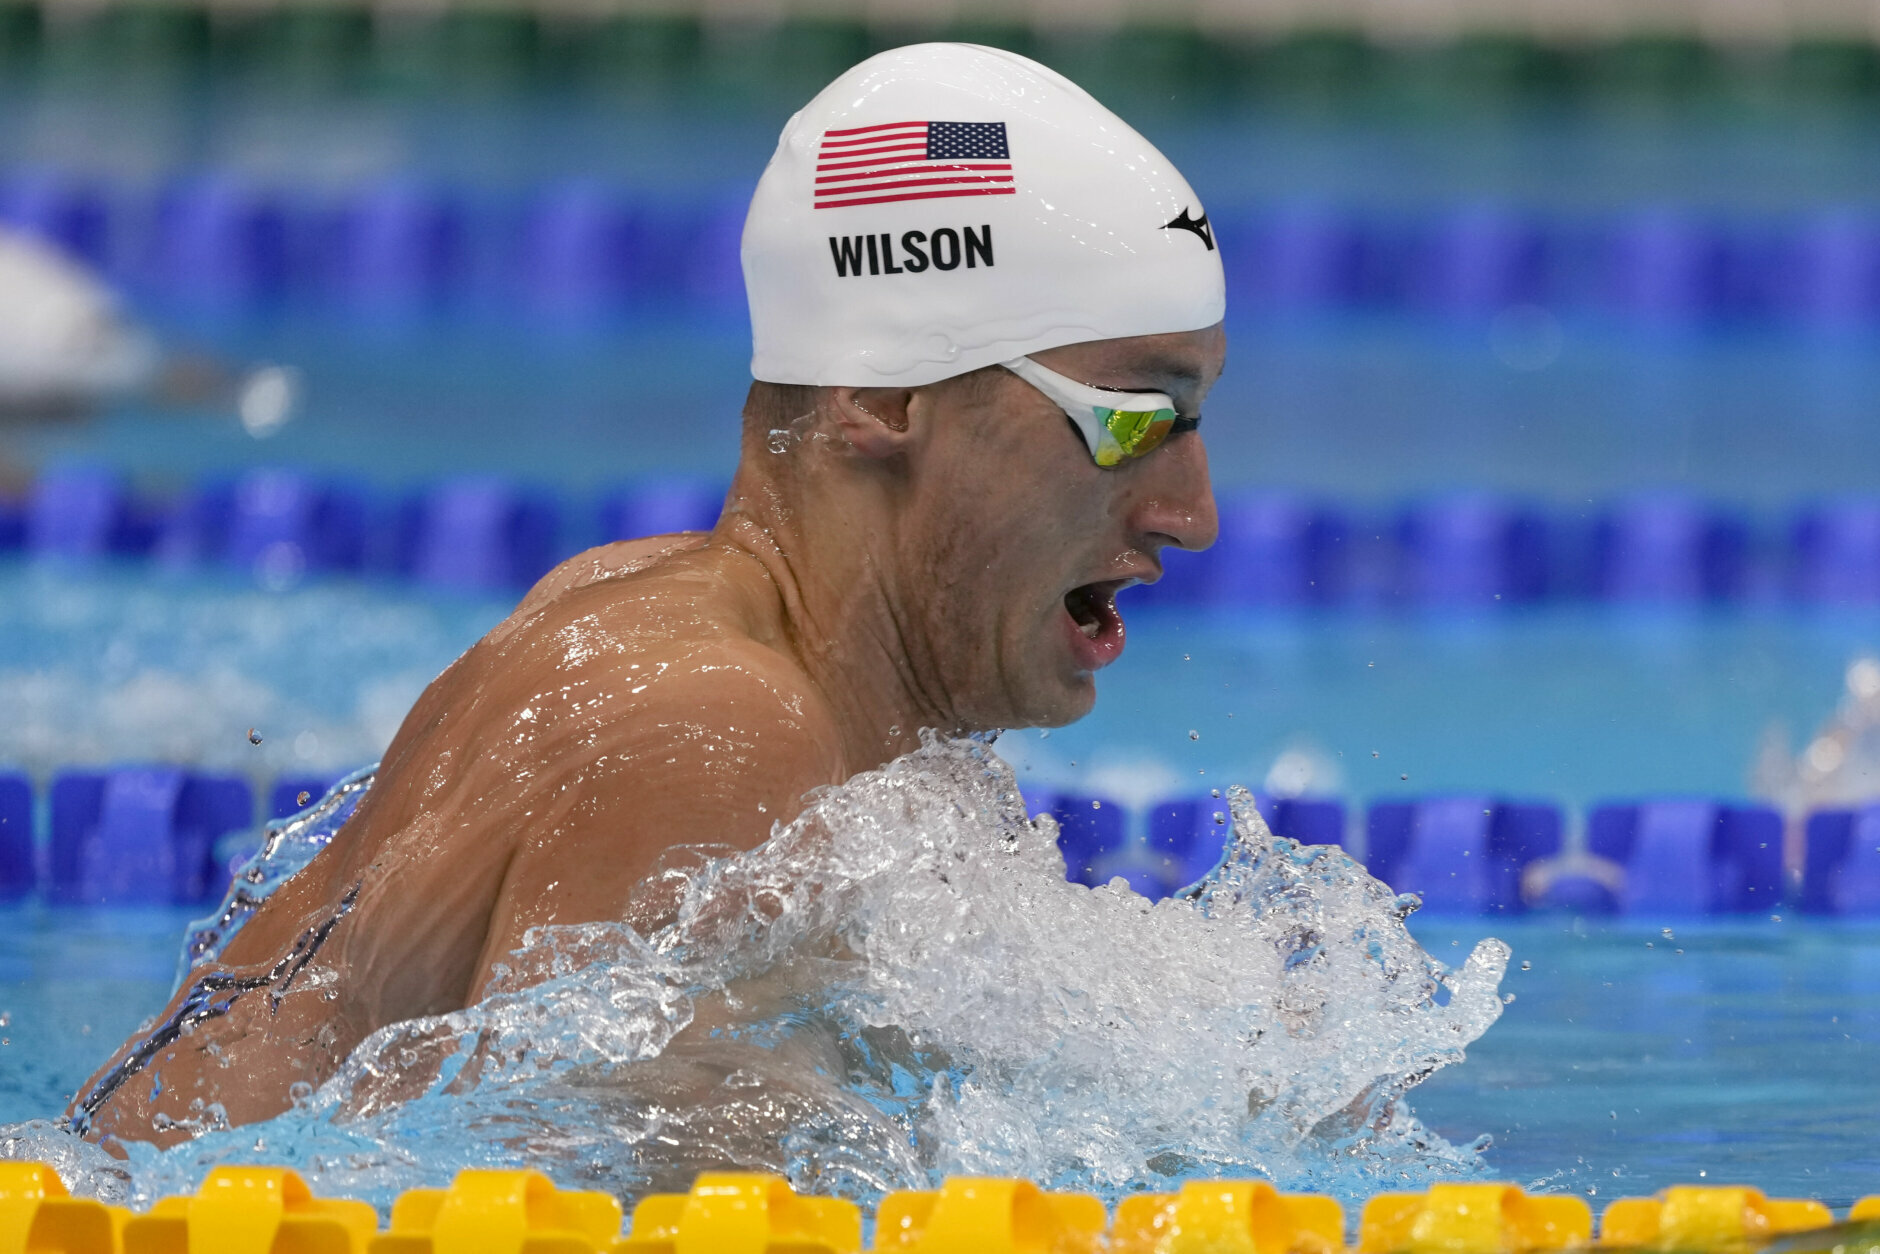 <p><strong>Andrew Wilson (Bethesda, Maryland) — Swimming</strong></p>
<p><strong>Notable facts:</strong> Not to be confused with the older brother of actors Luke and Owen Wilson, this Andrew Wilson made a name for himself at the U.S. Olympic trials with his historic second-place finish in the 100-meter breaststroke. The Emory University graduate is believed to be the first former Division III swimmer to earn a spot on the U.S. Olympic swim team.</p>
<p><strong>Competition:</strong> 100 breaststroke, 200 breaststroke — July 26-29</p>
<p><strong>Results</strong>: Men&#8217;s 100 breaststroke — sixth</p>
